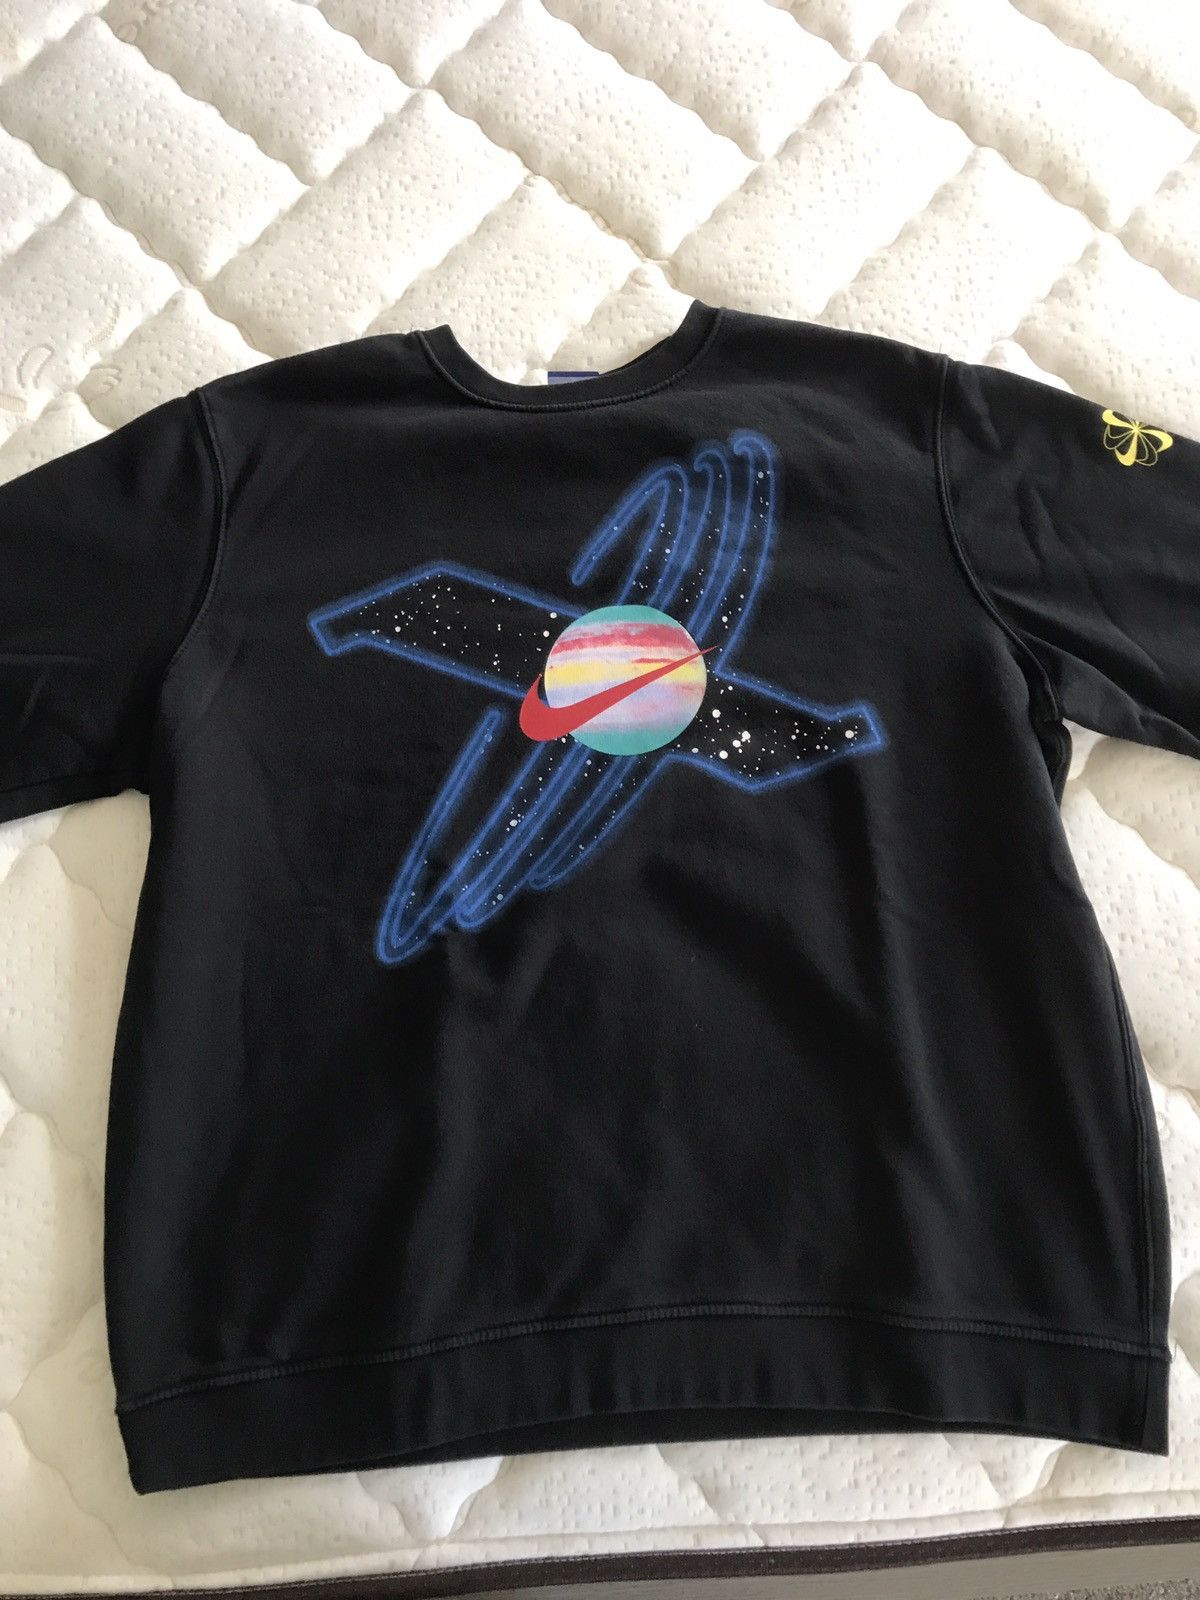 Nike LIMITED EDITION NIKE GALAXY GLOW IN THE DARK SWEATER Size US L / EU 52-54 / 3 - 2 Preview